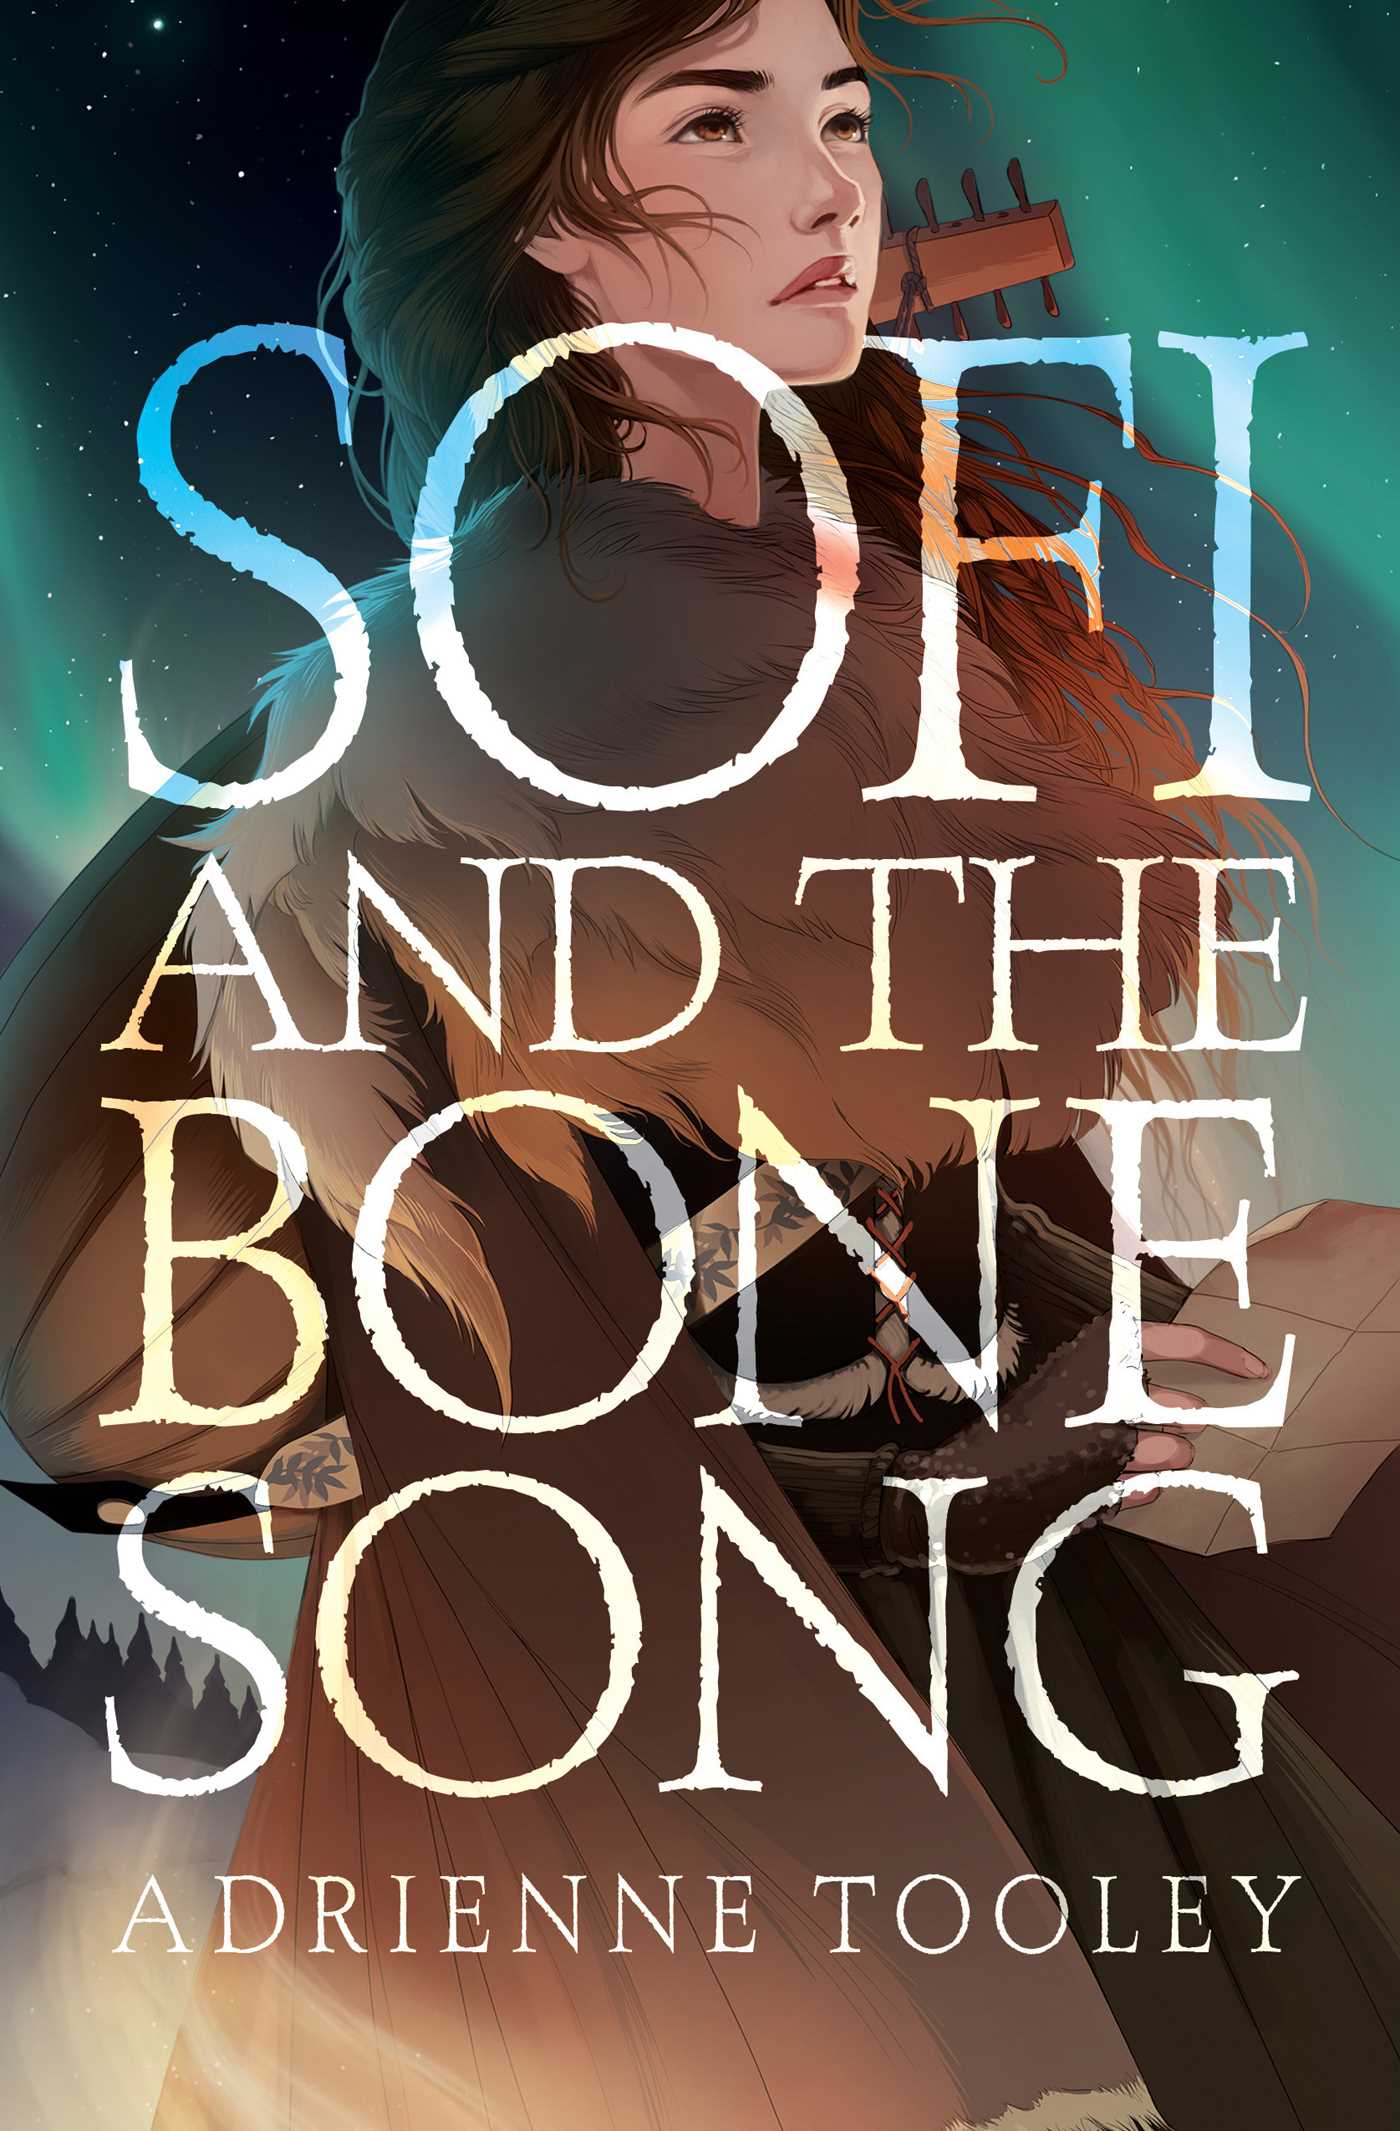 Sofi and the Bone Song by Adrienne Tooley